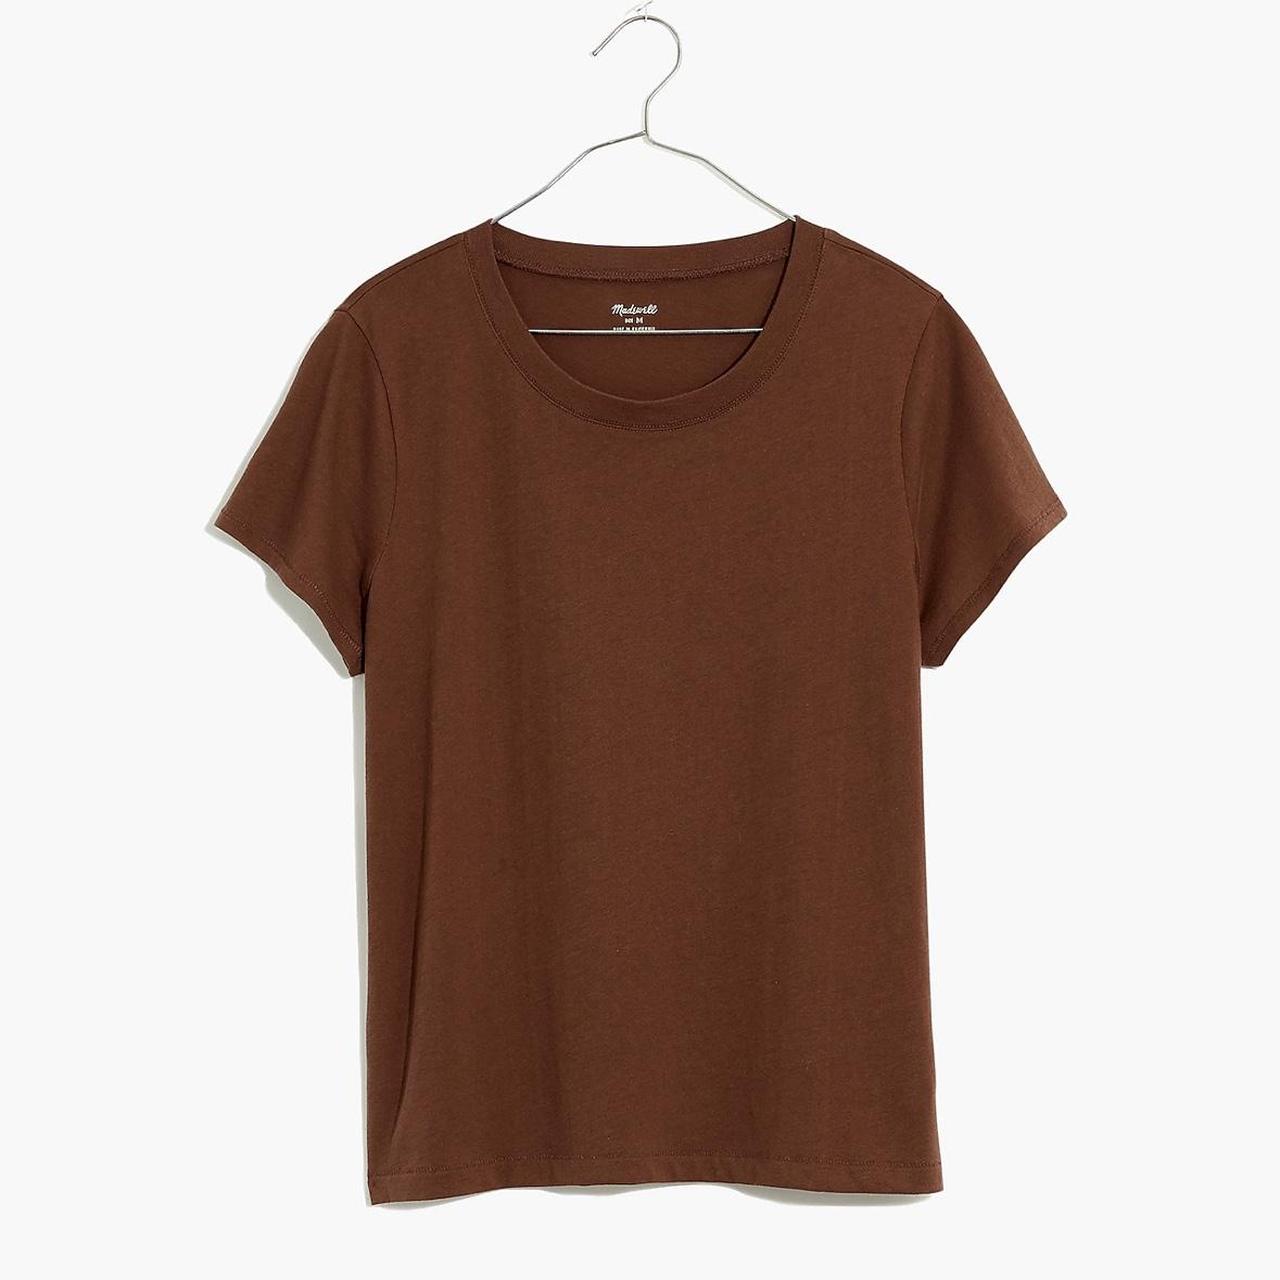 North side vintage tee from Madewell in Hot Cocoa!... - Depop